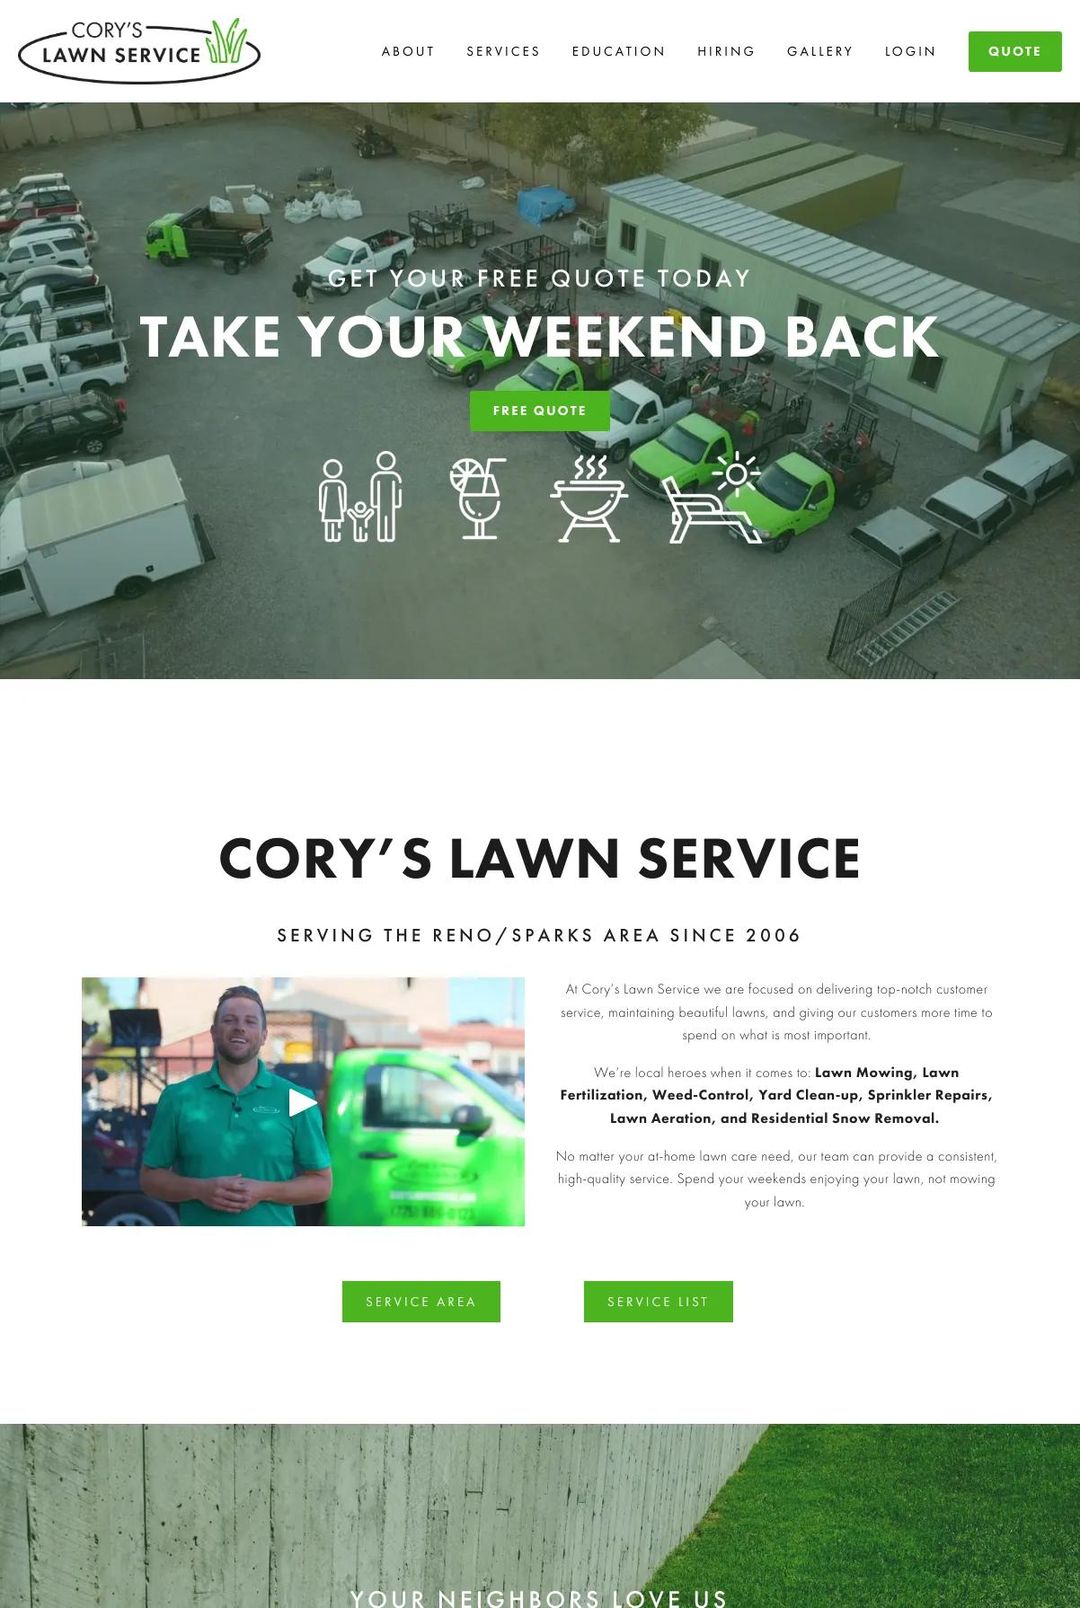 Screenshot 1 of Cory’s Lawn Service (Example Squarespace Lawn Care Website)